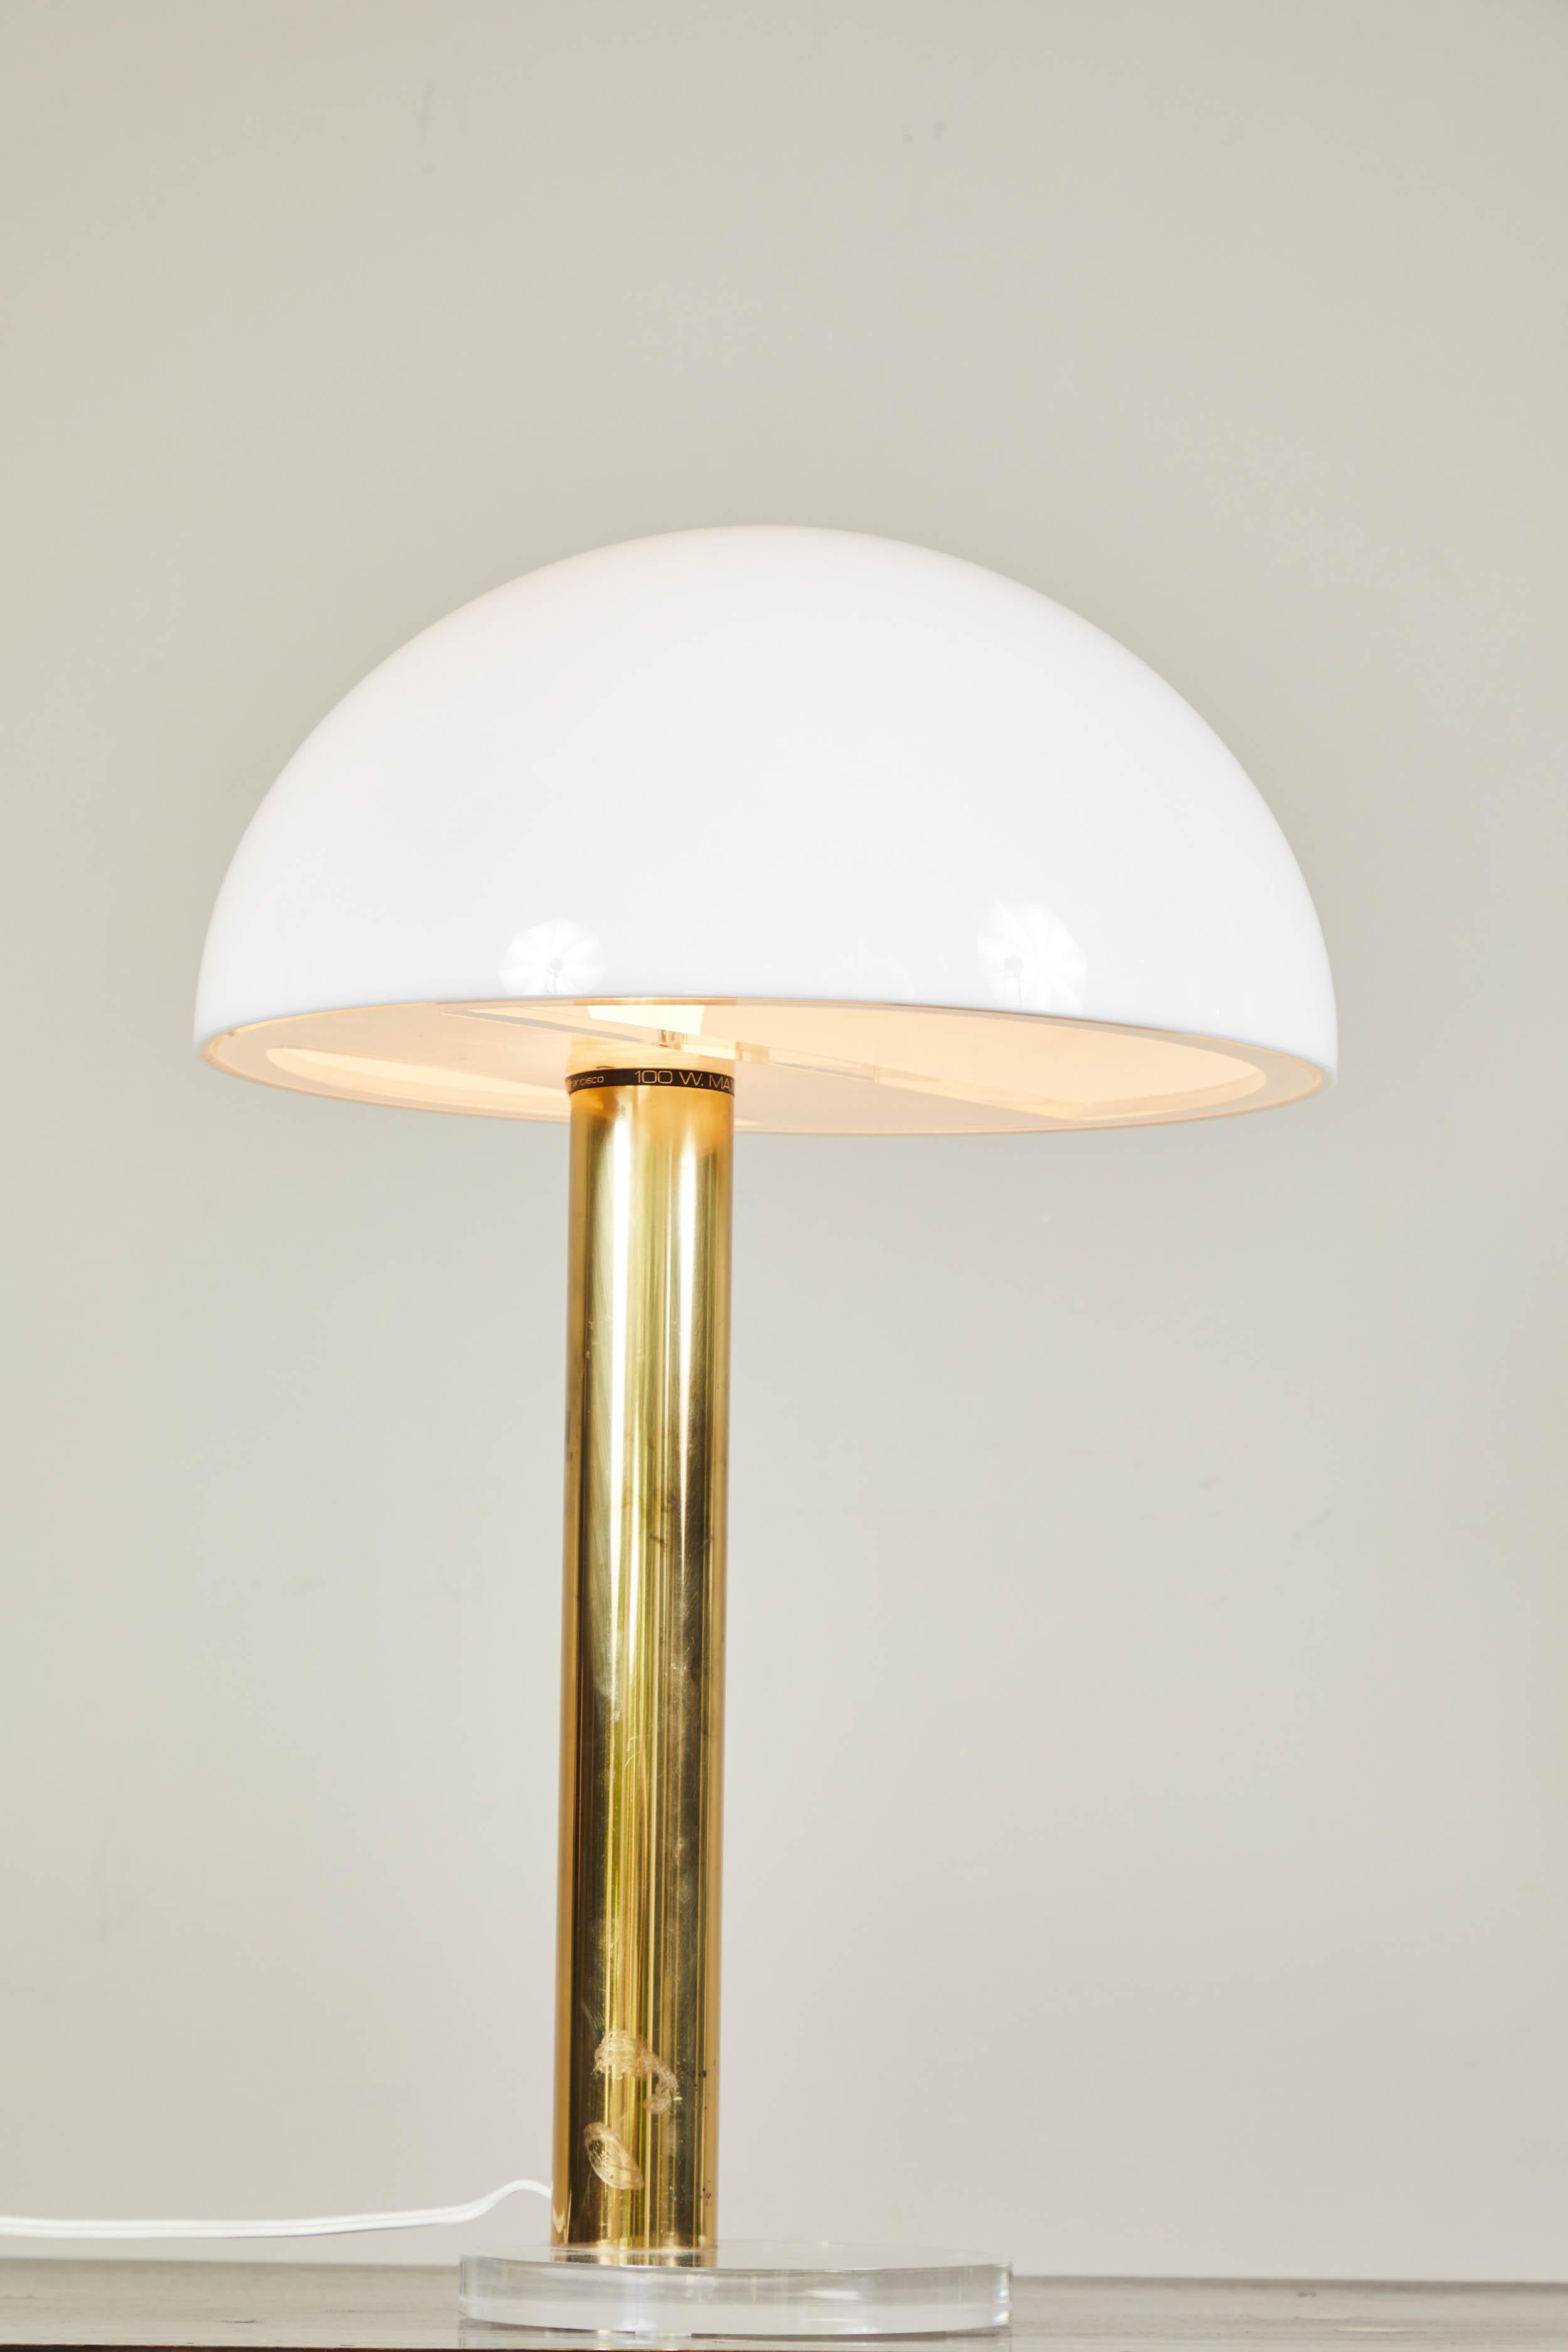 American Gage Cauchois 1980s Brass and Lucite Touch Lamp